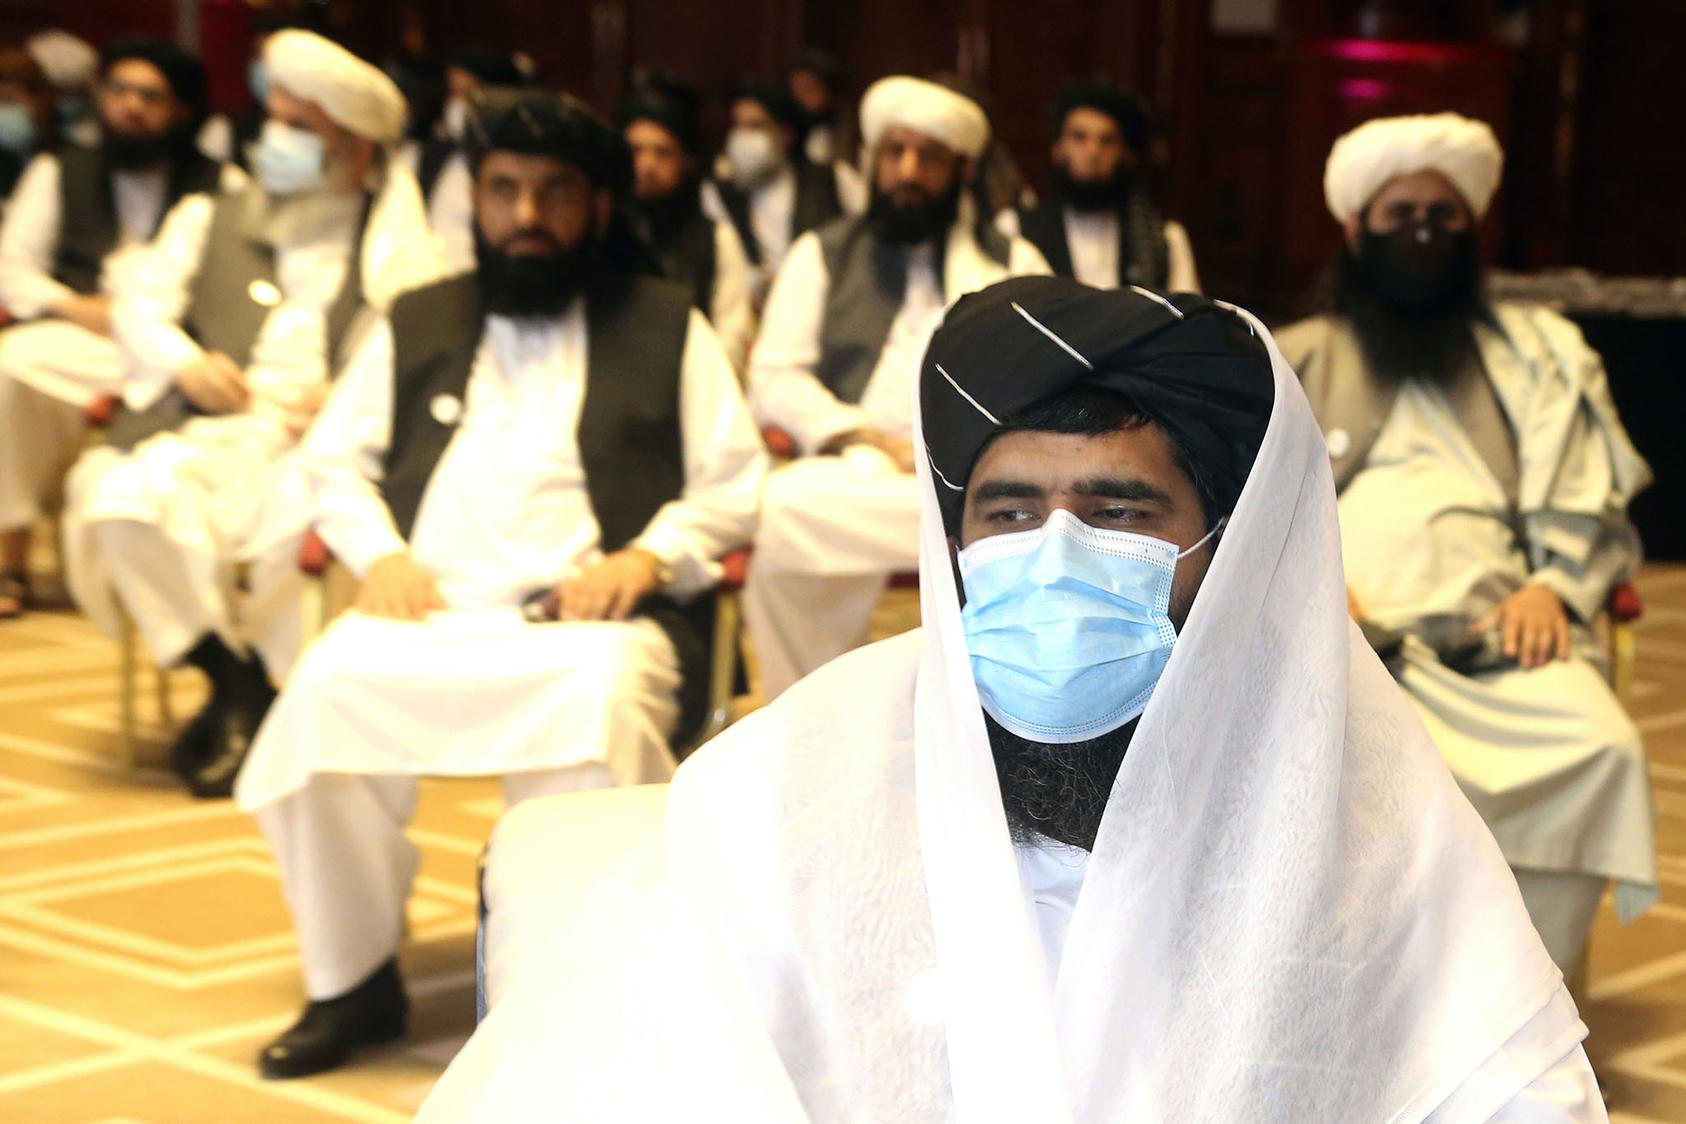 Members of the Taliban negotiation delegation during the opening session of peace talks with the Afghan government in Doha, Qatar, on September 12, 2020. (Photo by Hussein Sayed/AP)